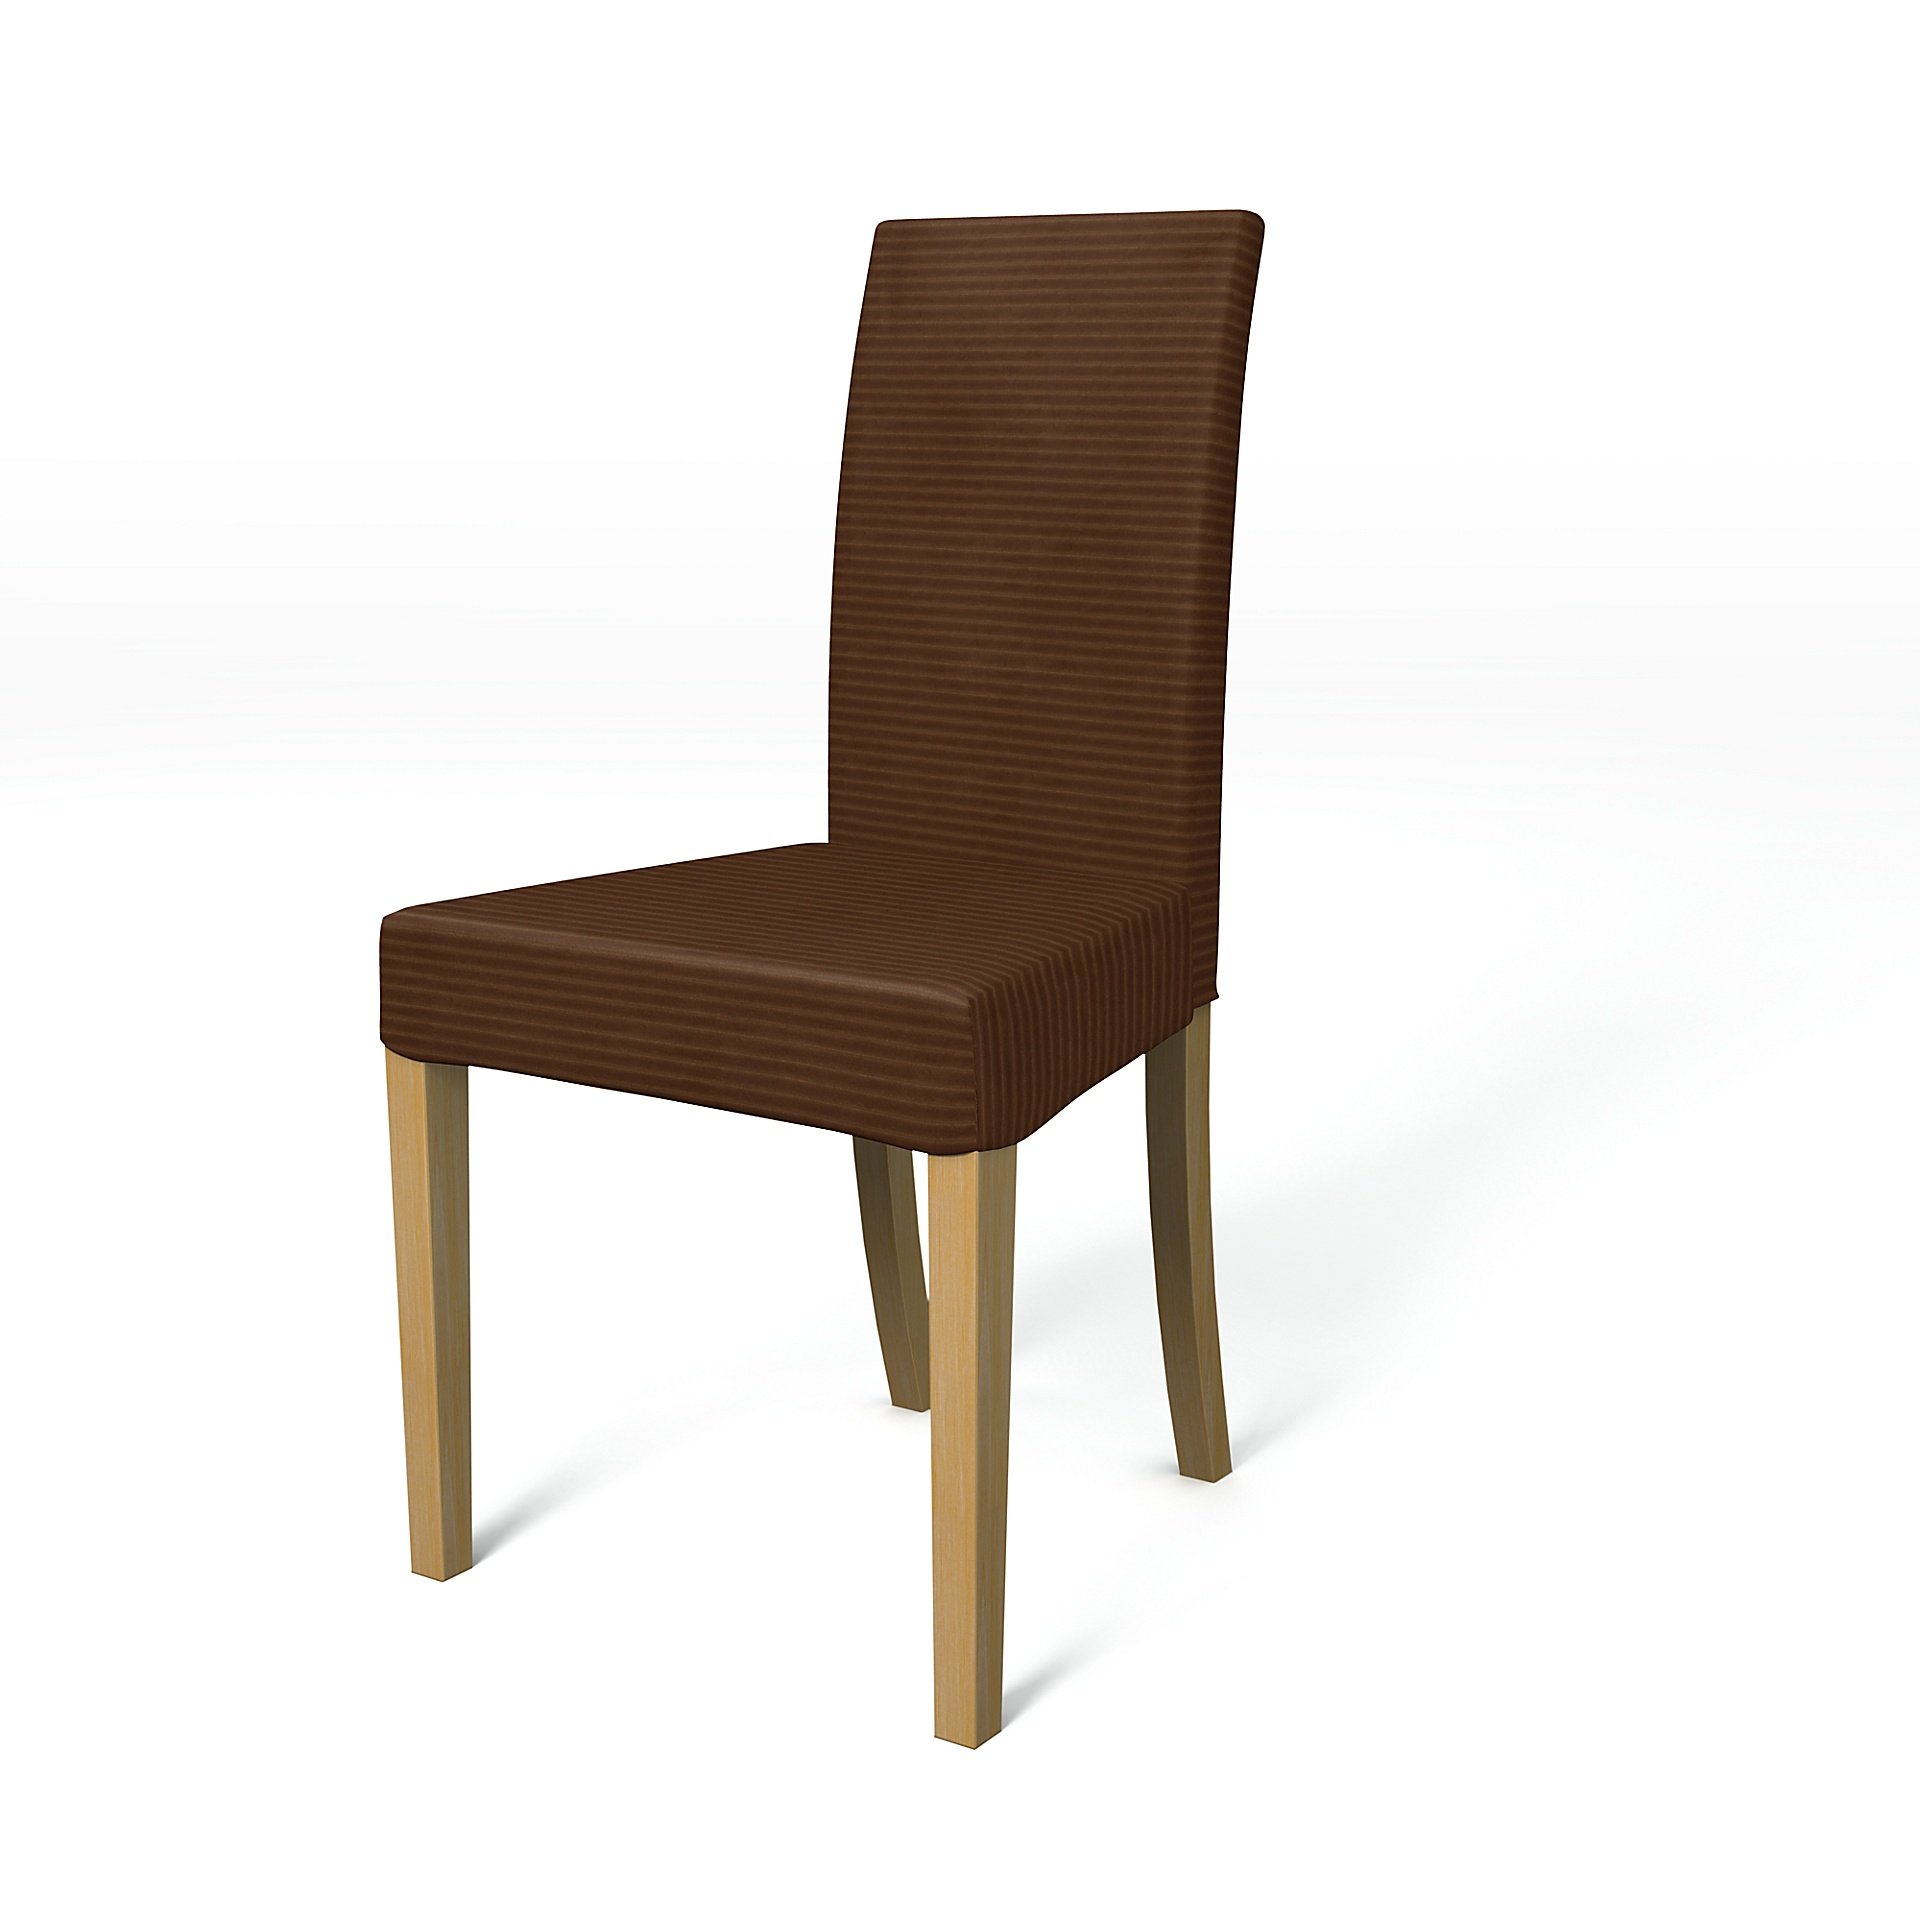 IKEA - Harry Dining Chair Cover, Chocolate Brown, Corduroy - Bemz